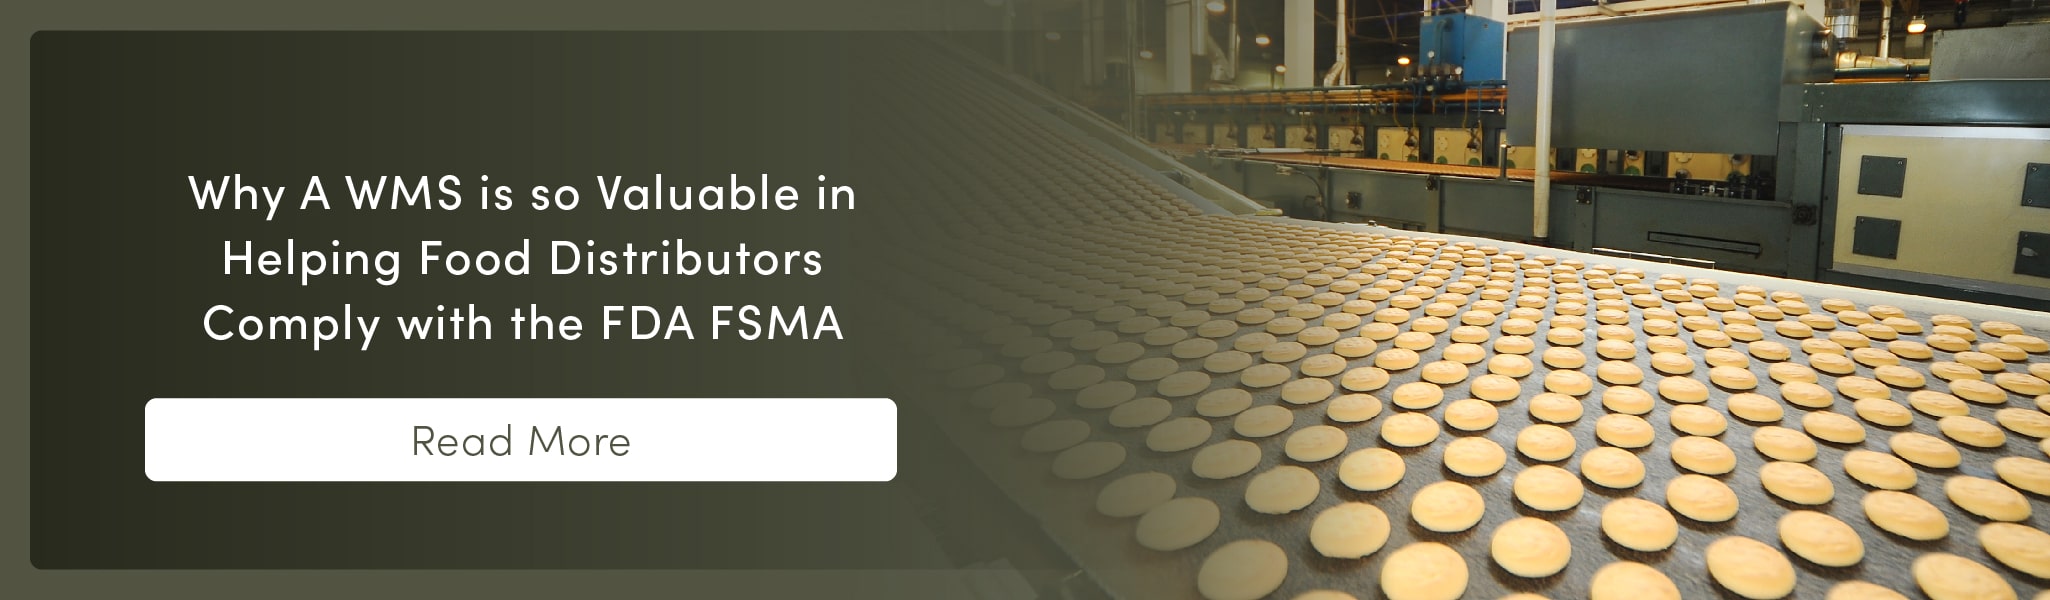 Why A WMS is so Valuable in Helping Food Distributors Comply with the FDA FSMA 